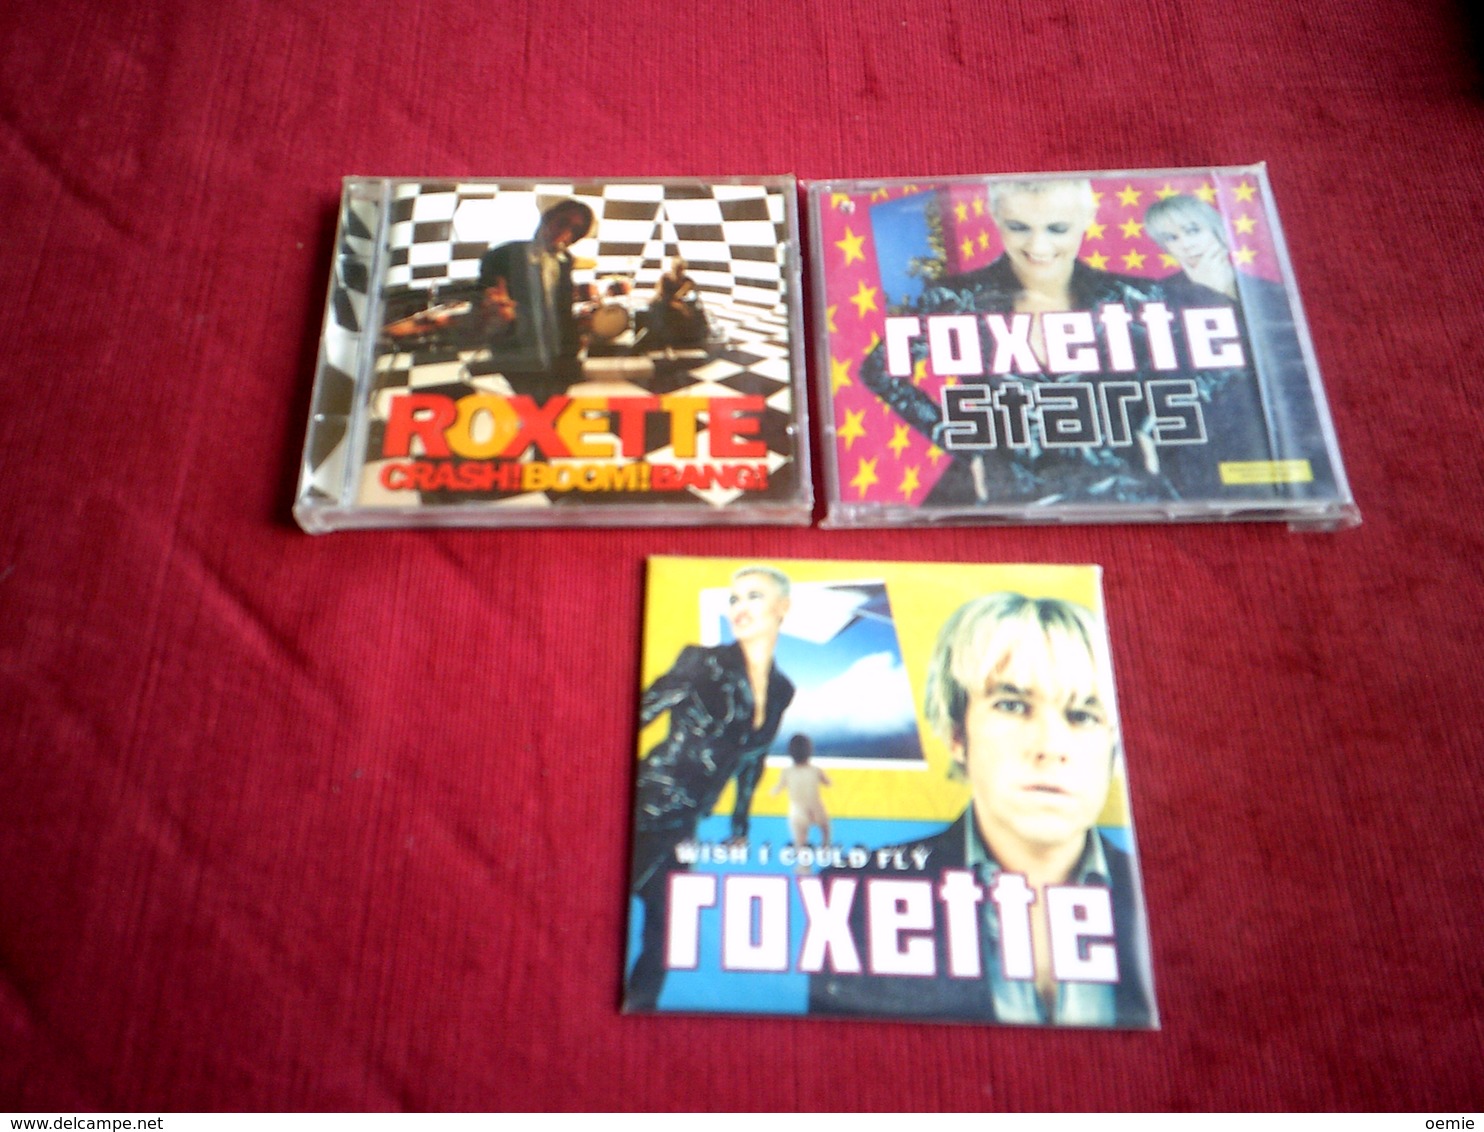 ROXETTE  °  COLLECTION DE 3 CD - Complete Collections